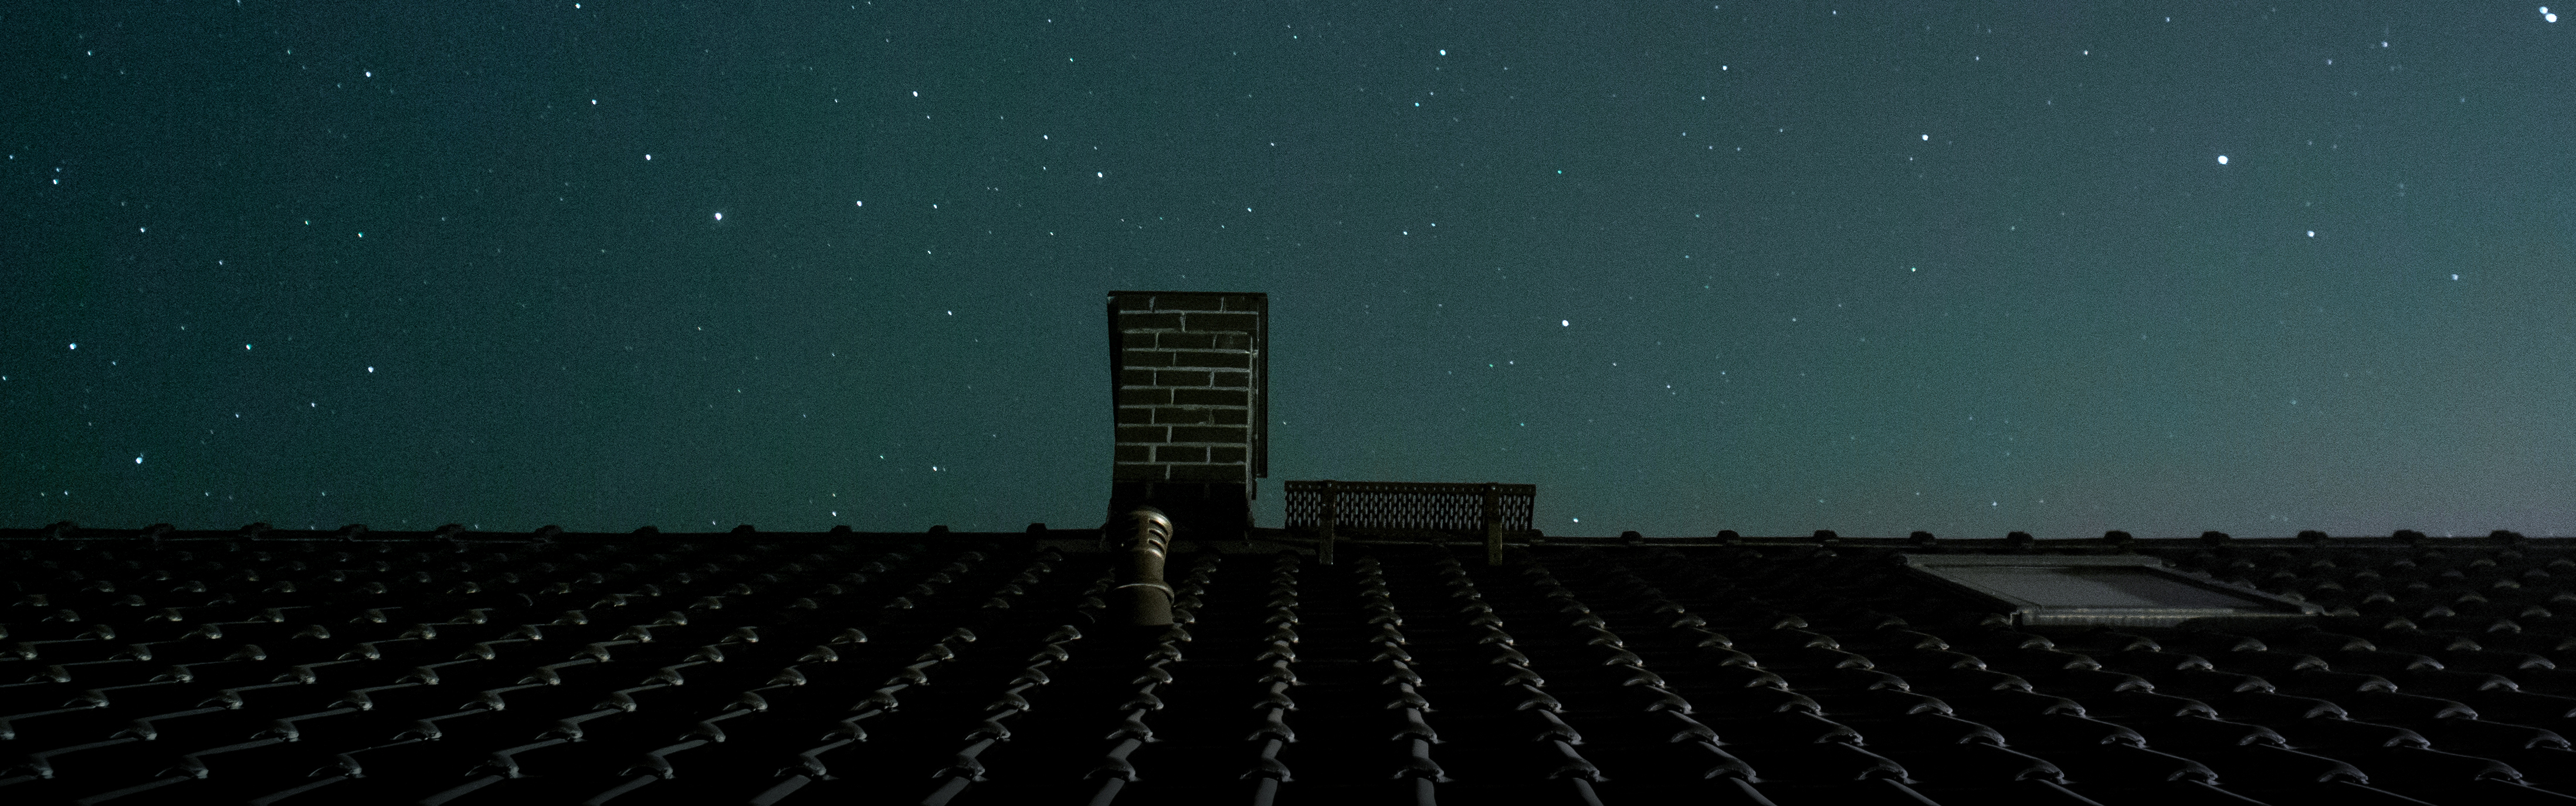 Chimney and roof line view at night with stars in the background